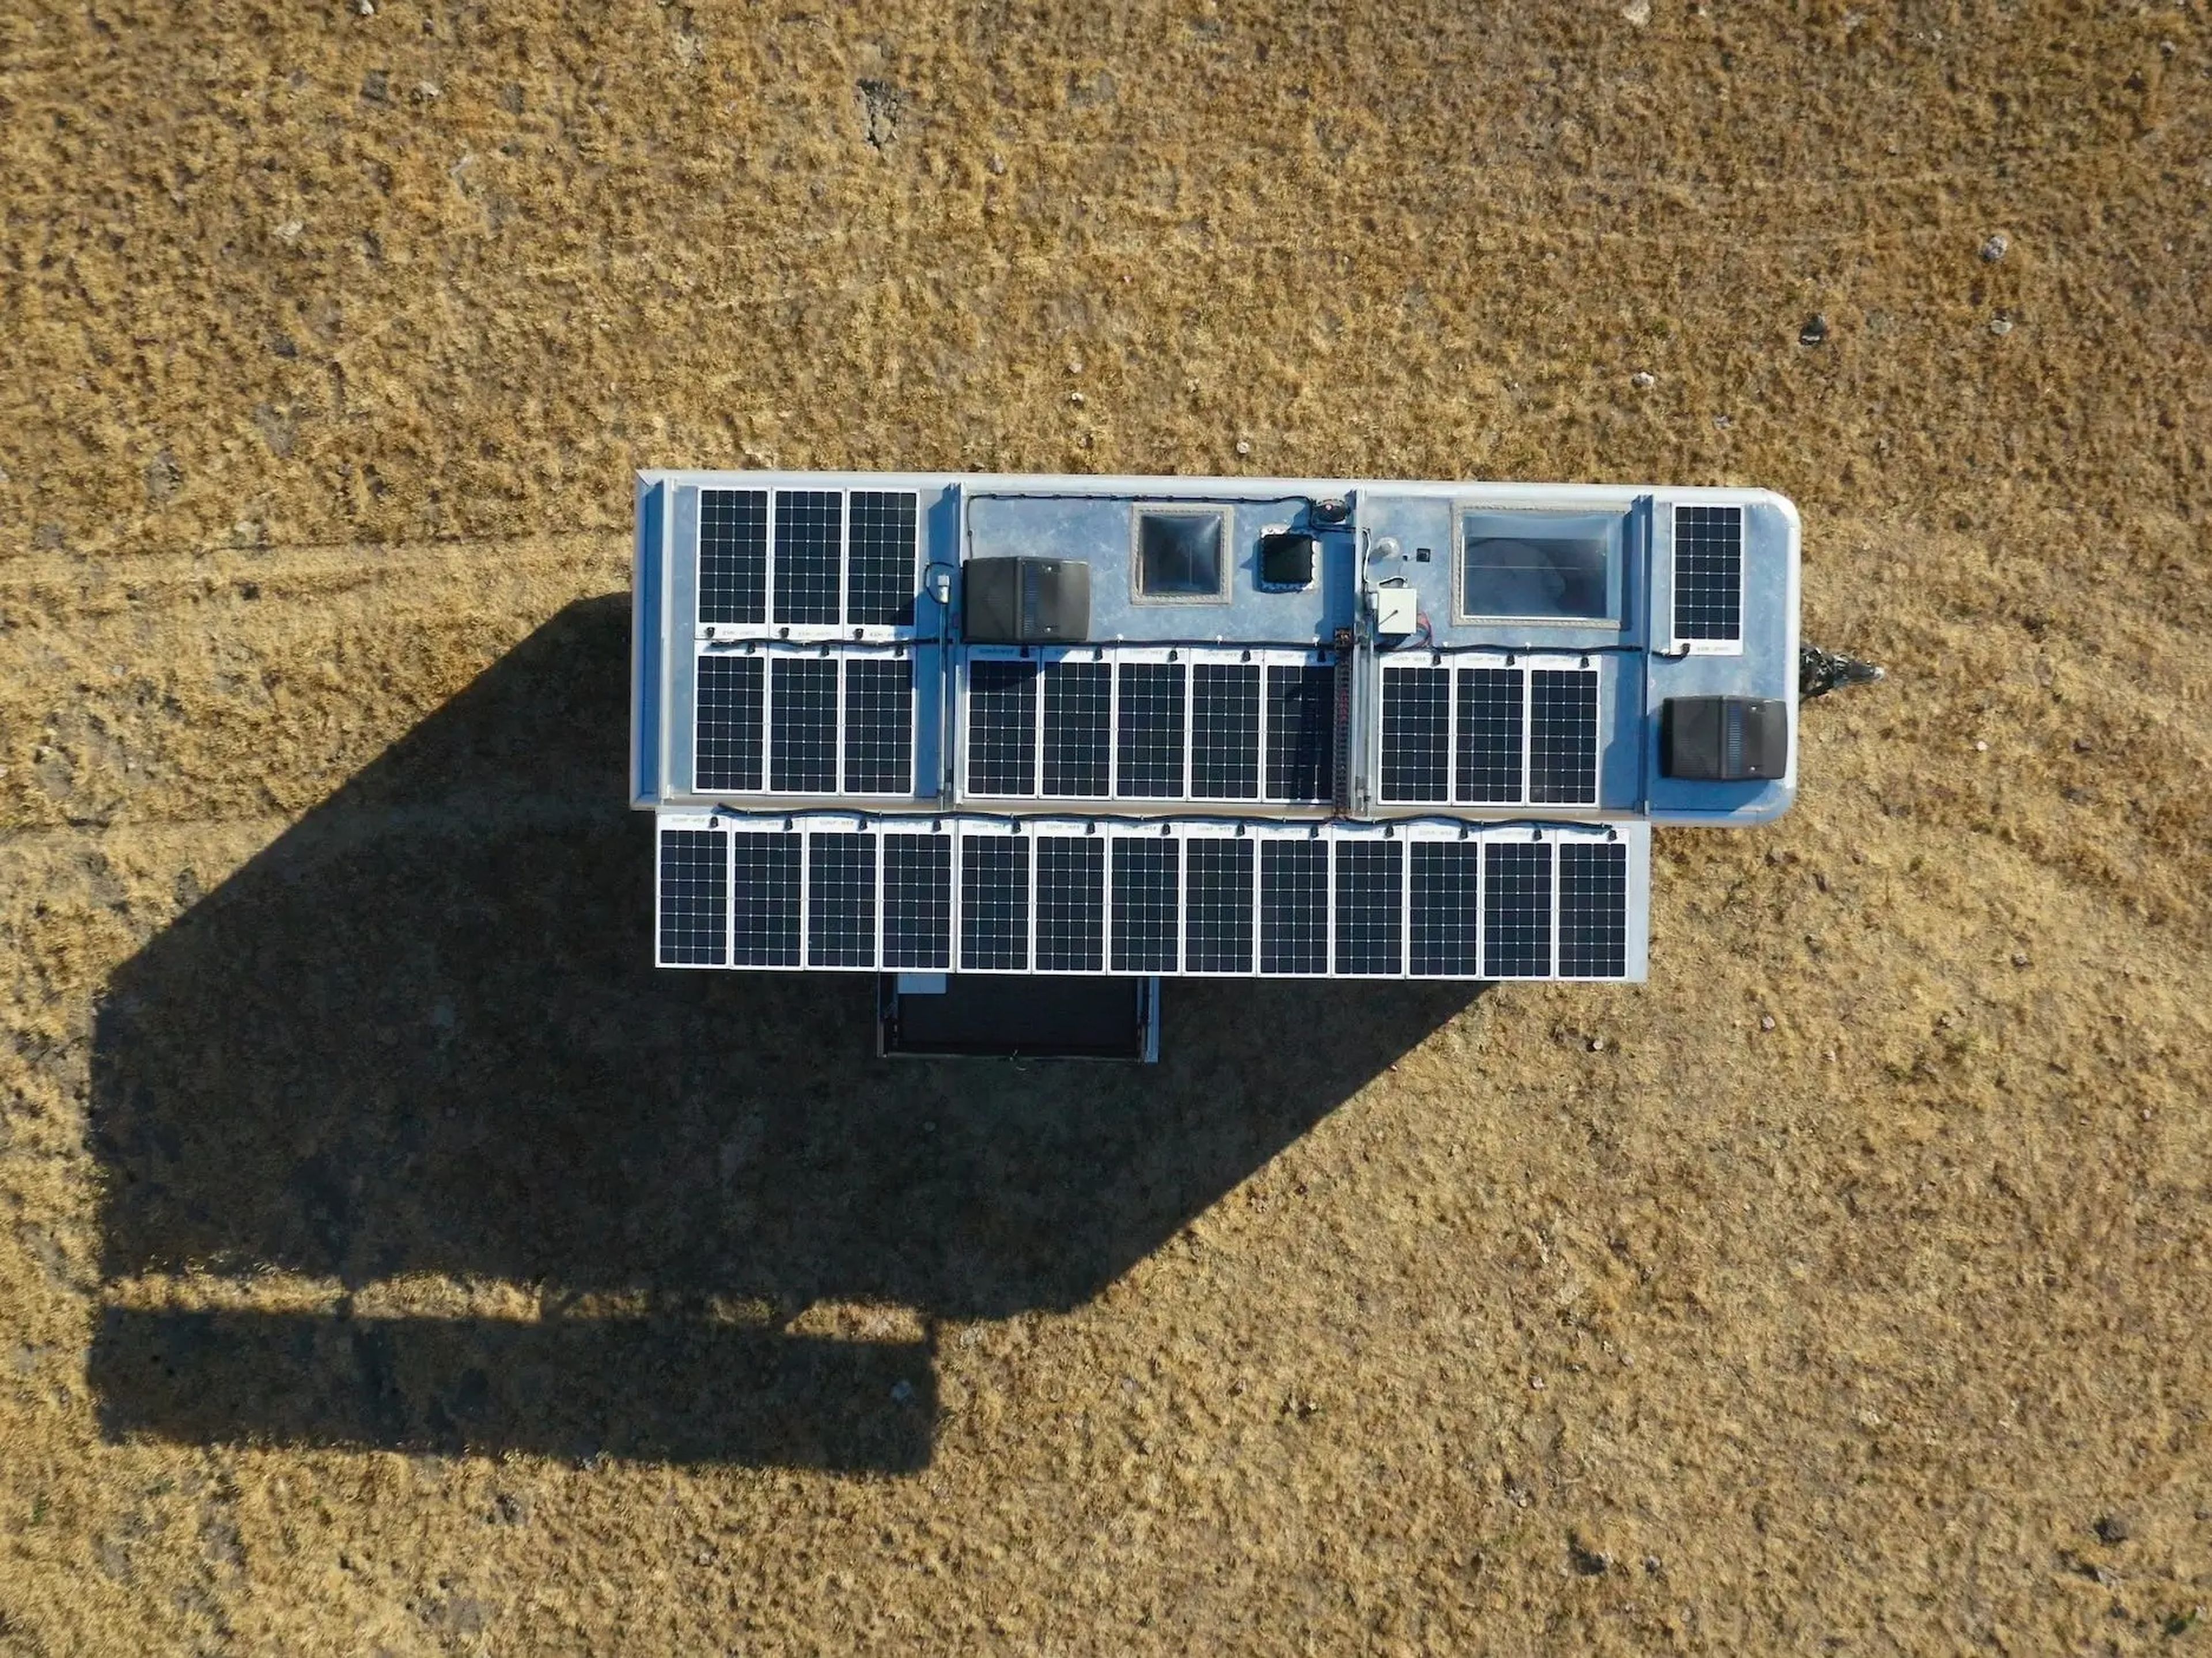 The solar panels on top of the travel trailer as the trailer sits on a field.